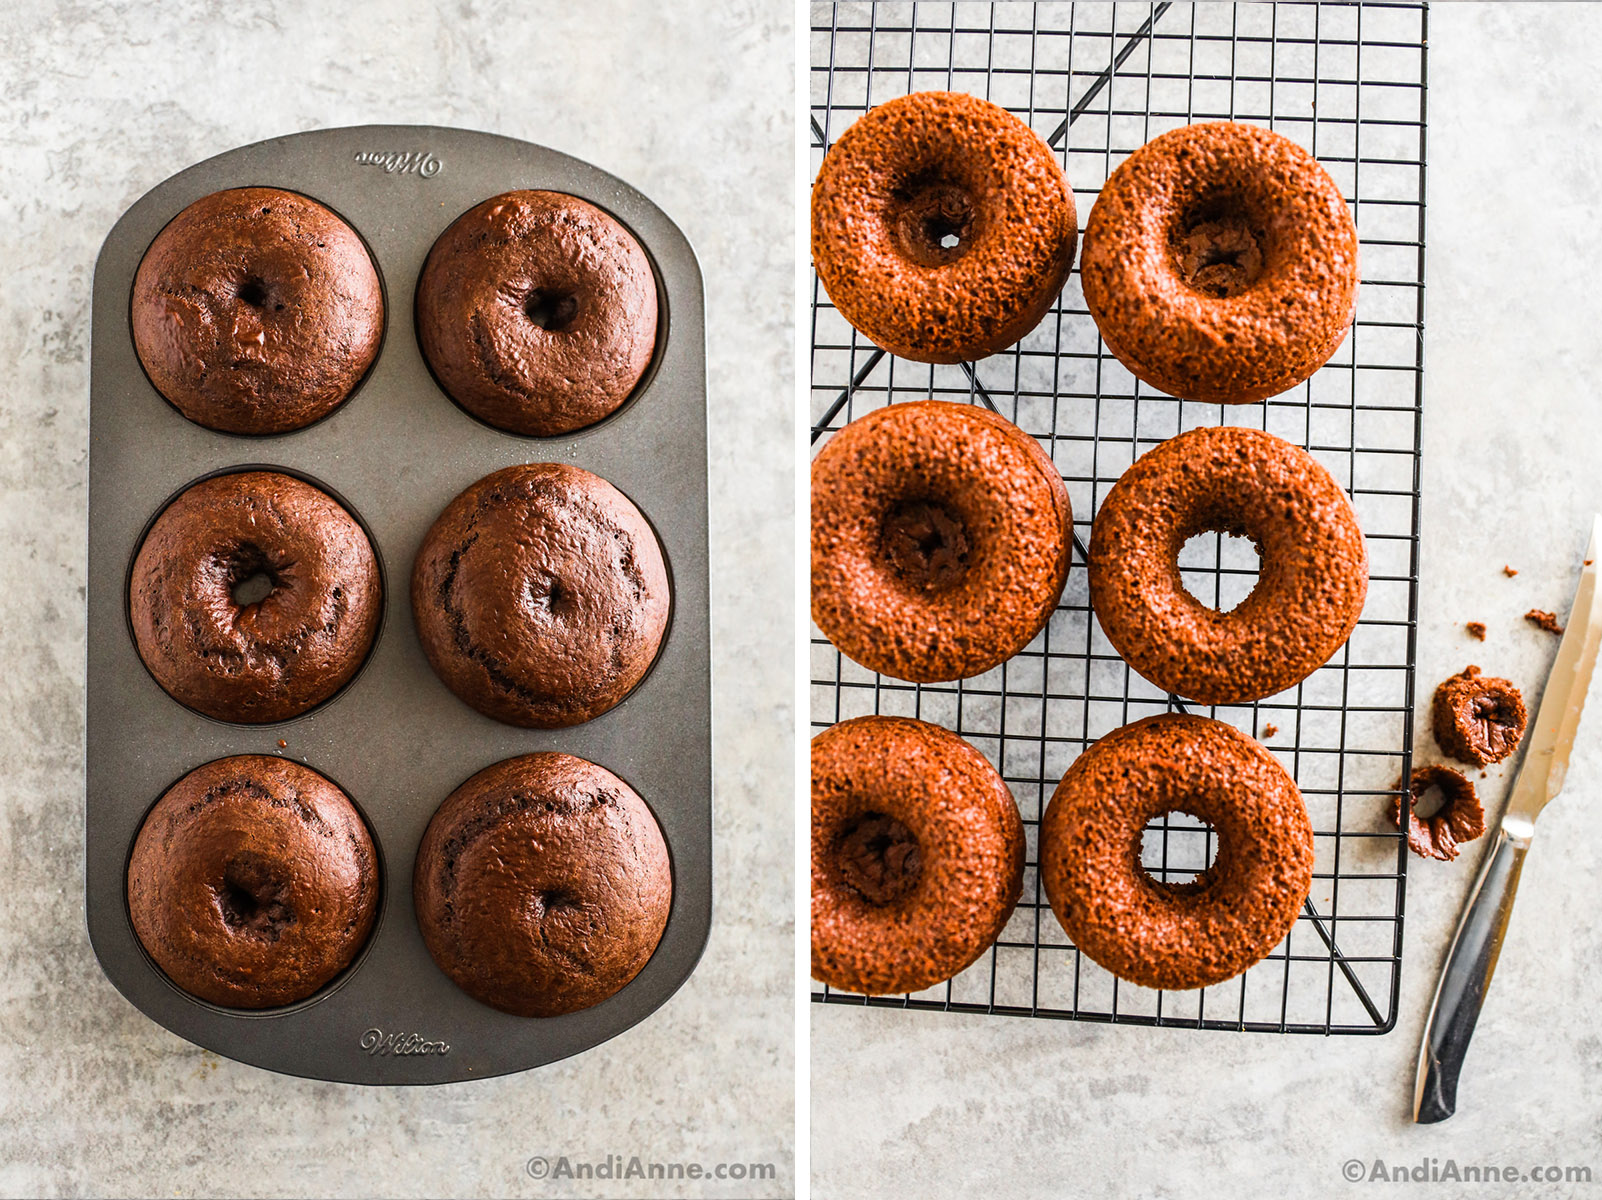 Two images, first is baked donuts in a donut pan, second is baked donuts on a cooling rack with a knife beside.